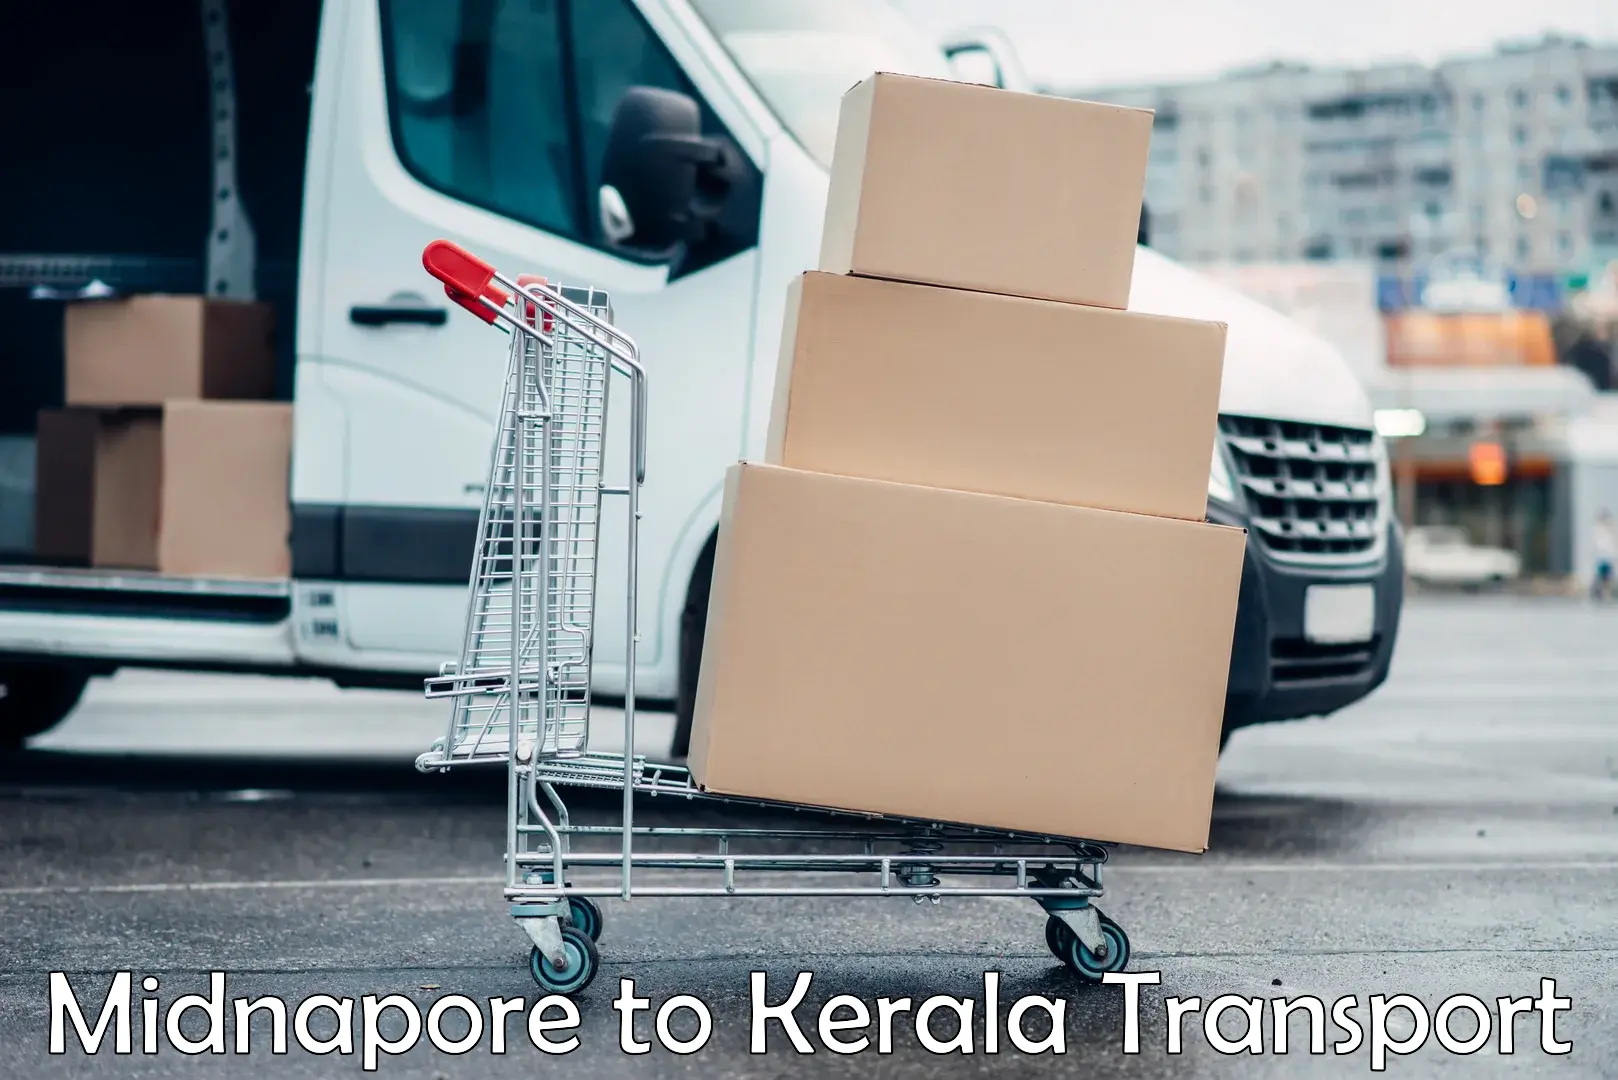 Commercial transport service Midnapore to Allepey